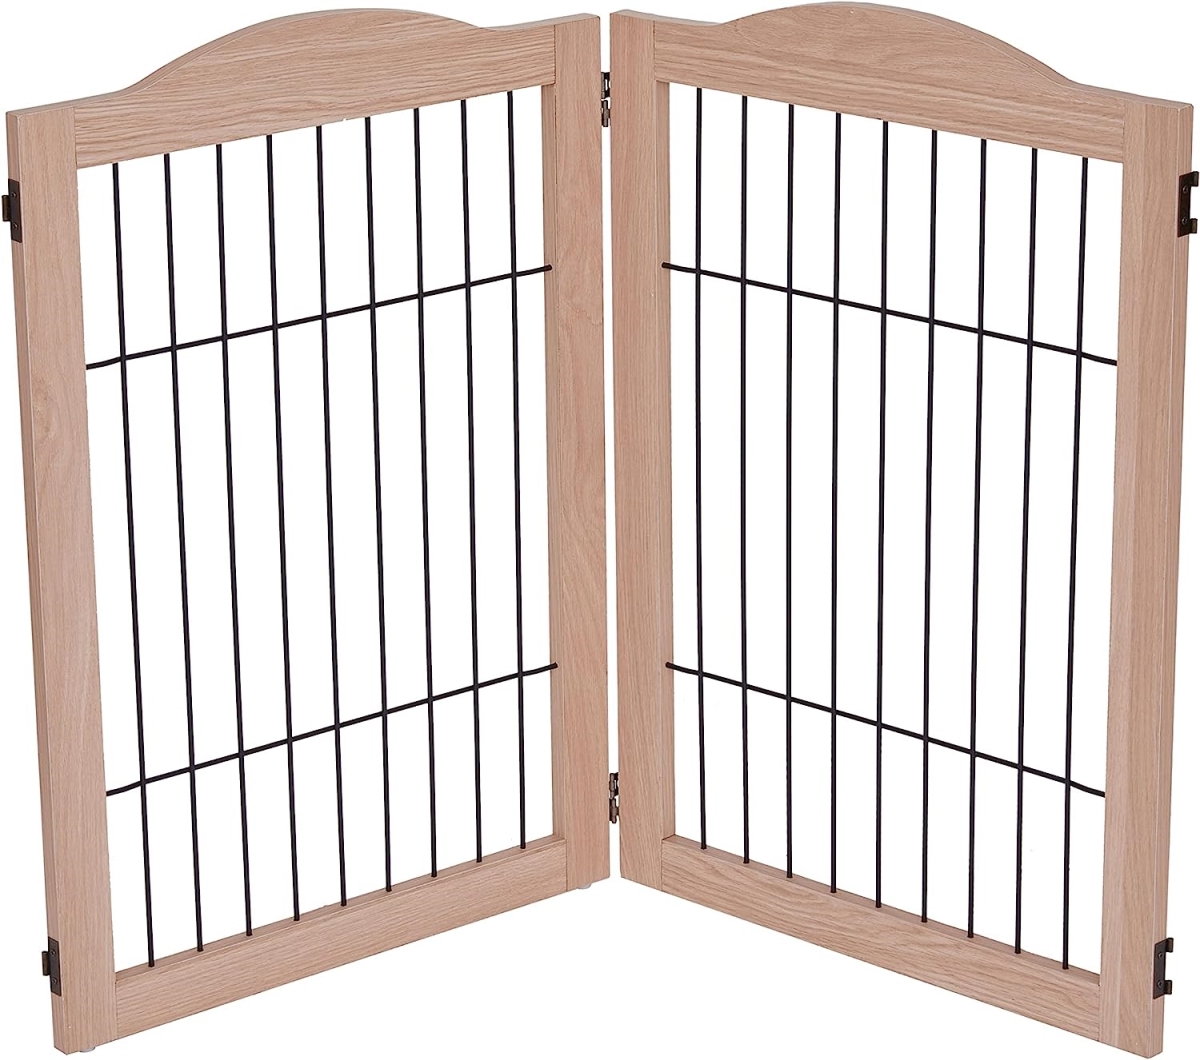 Picture of Arf Pets Dog Gate Arf Pets Freestanding Dog Gate, 2 Panel Extension, 360 configurable Wooden Wire Fence, 44' Wide, 31.5' Tall, Foldable - Indoor Use